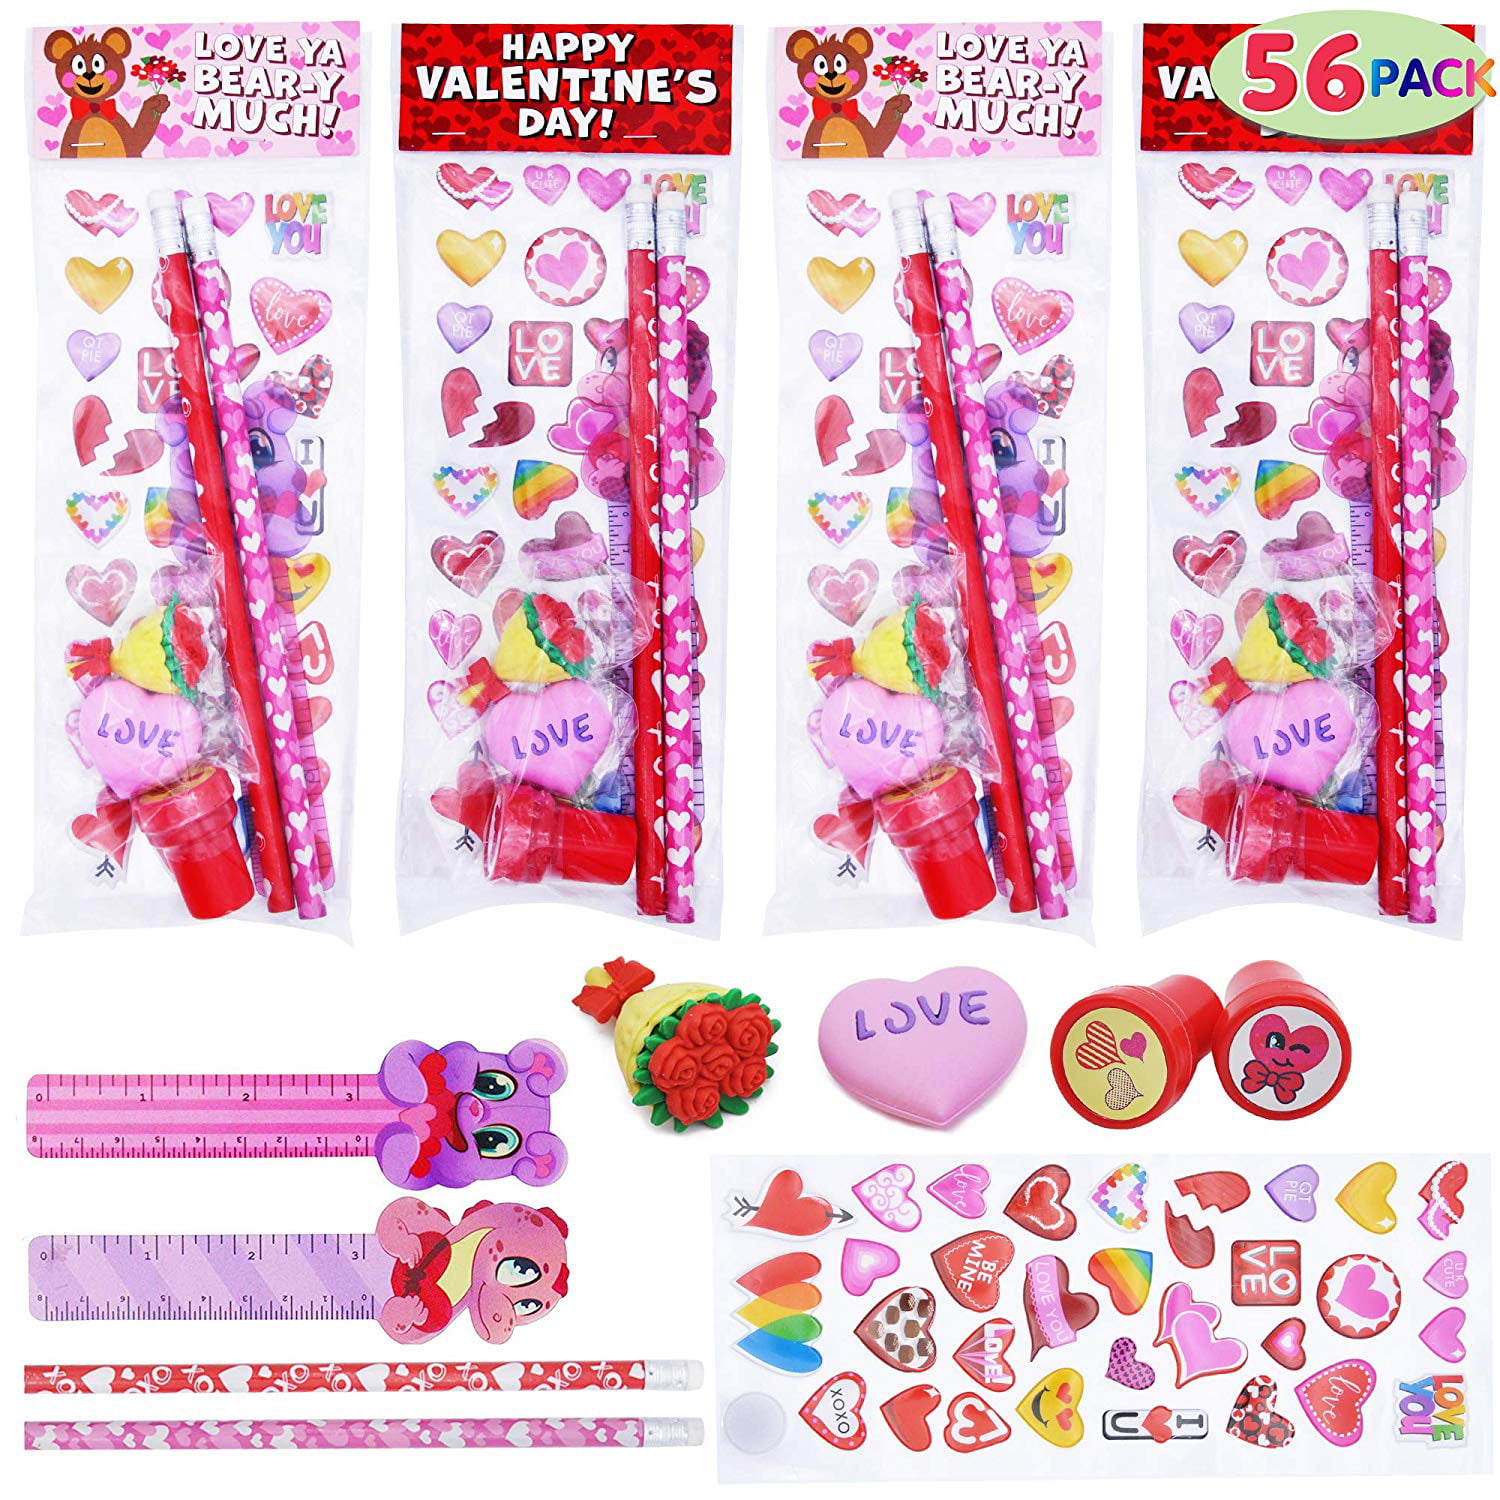 AMENON 28 Packs Large Valentine Heart Filled 56 Parachute Spring Launcher Toys Kids Valentines Cards Novelty Party Favors Set Boys Girls Valentine Classroom Gifts Exchange Game Prizes 